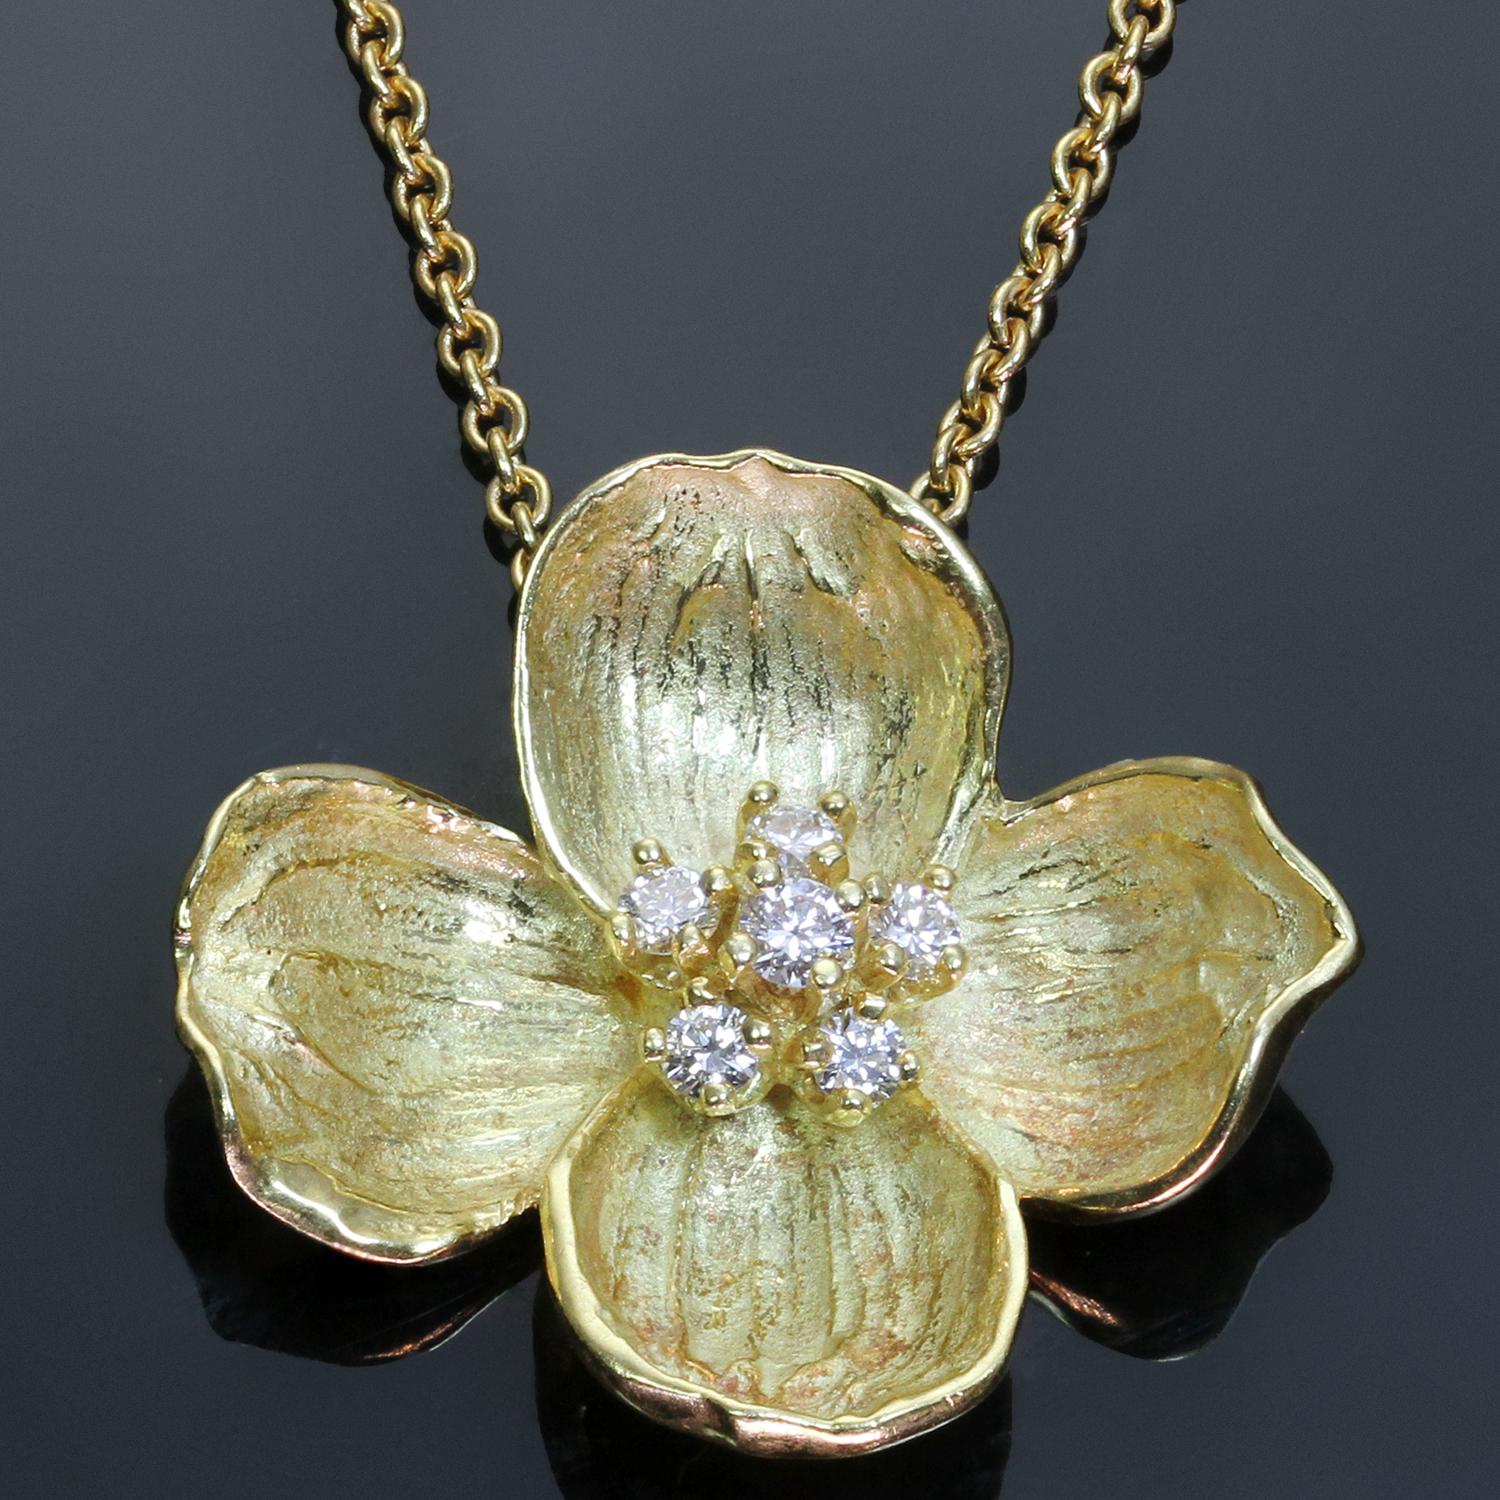 This gorgeous Tiffany & Co. necklace from the delicate floral Dogwood collection features the classic flower design crafted in 18k yellow gold and set with round brilliant F-G VVS2-VS1 diamonds weighing an estimated 0.30 carats. Made in United